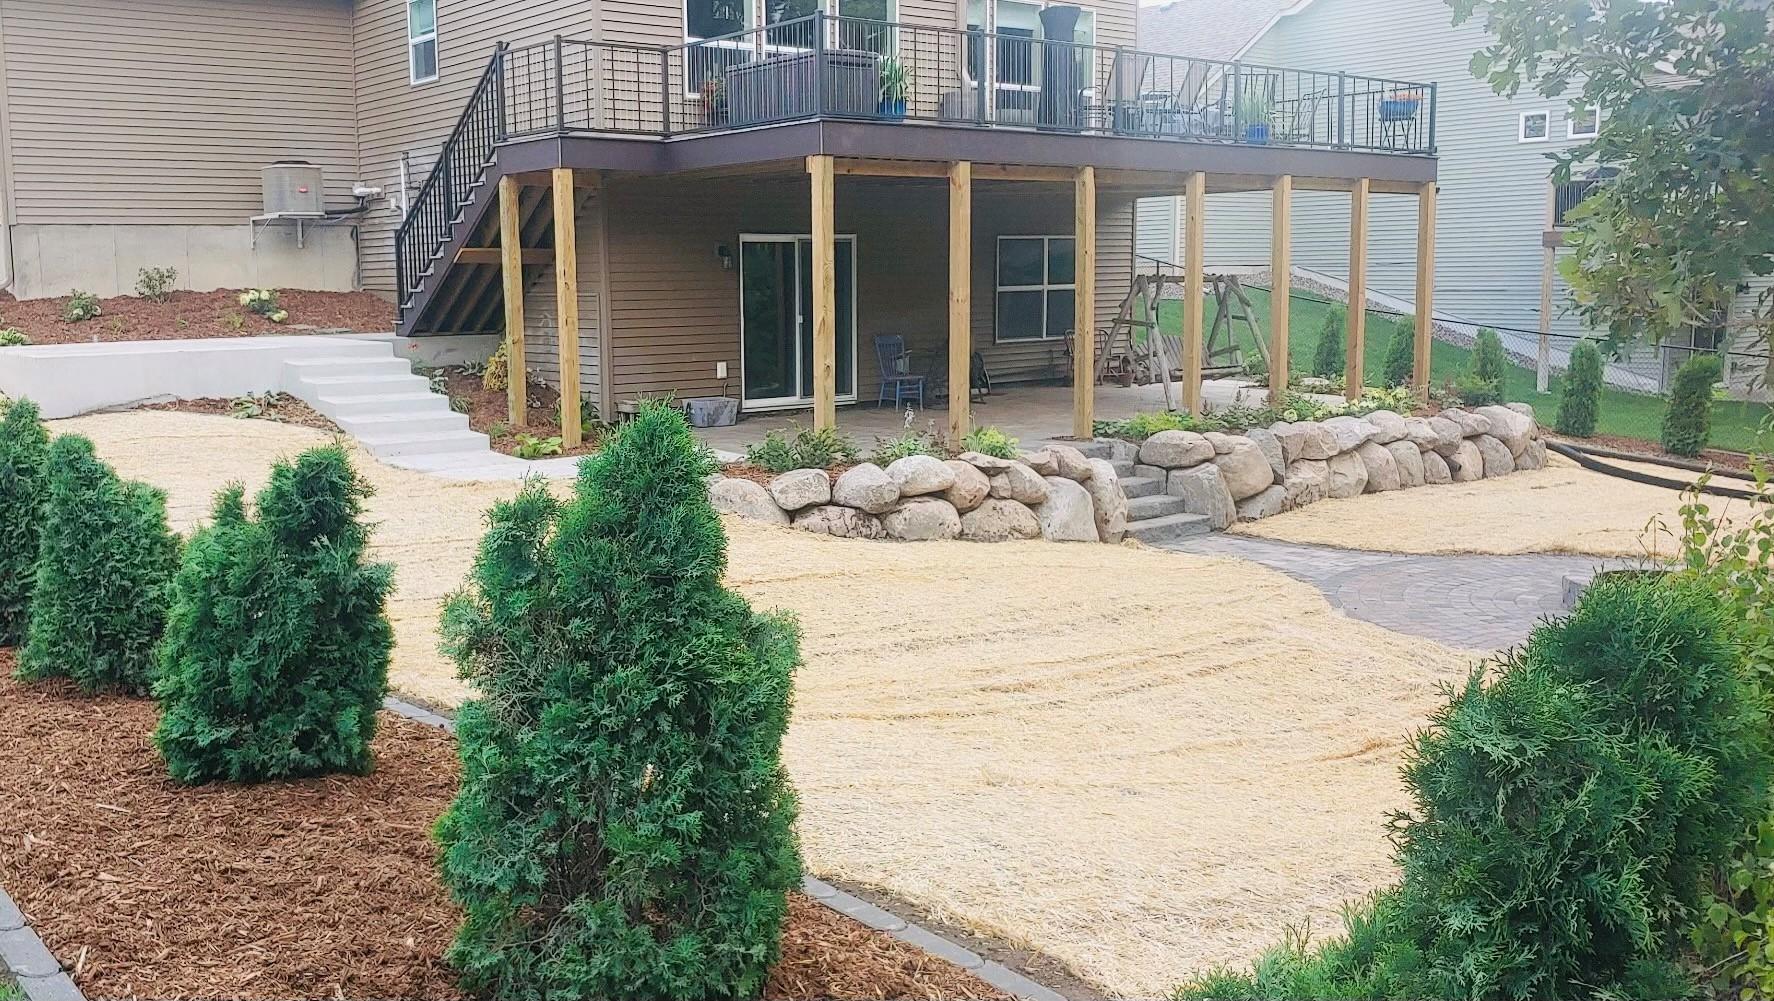 Progress photo of a residential outdoor living landscaping project.